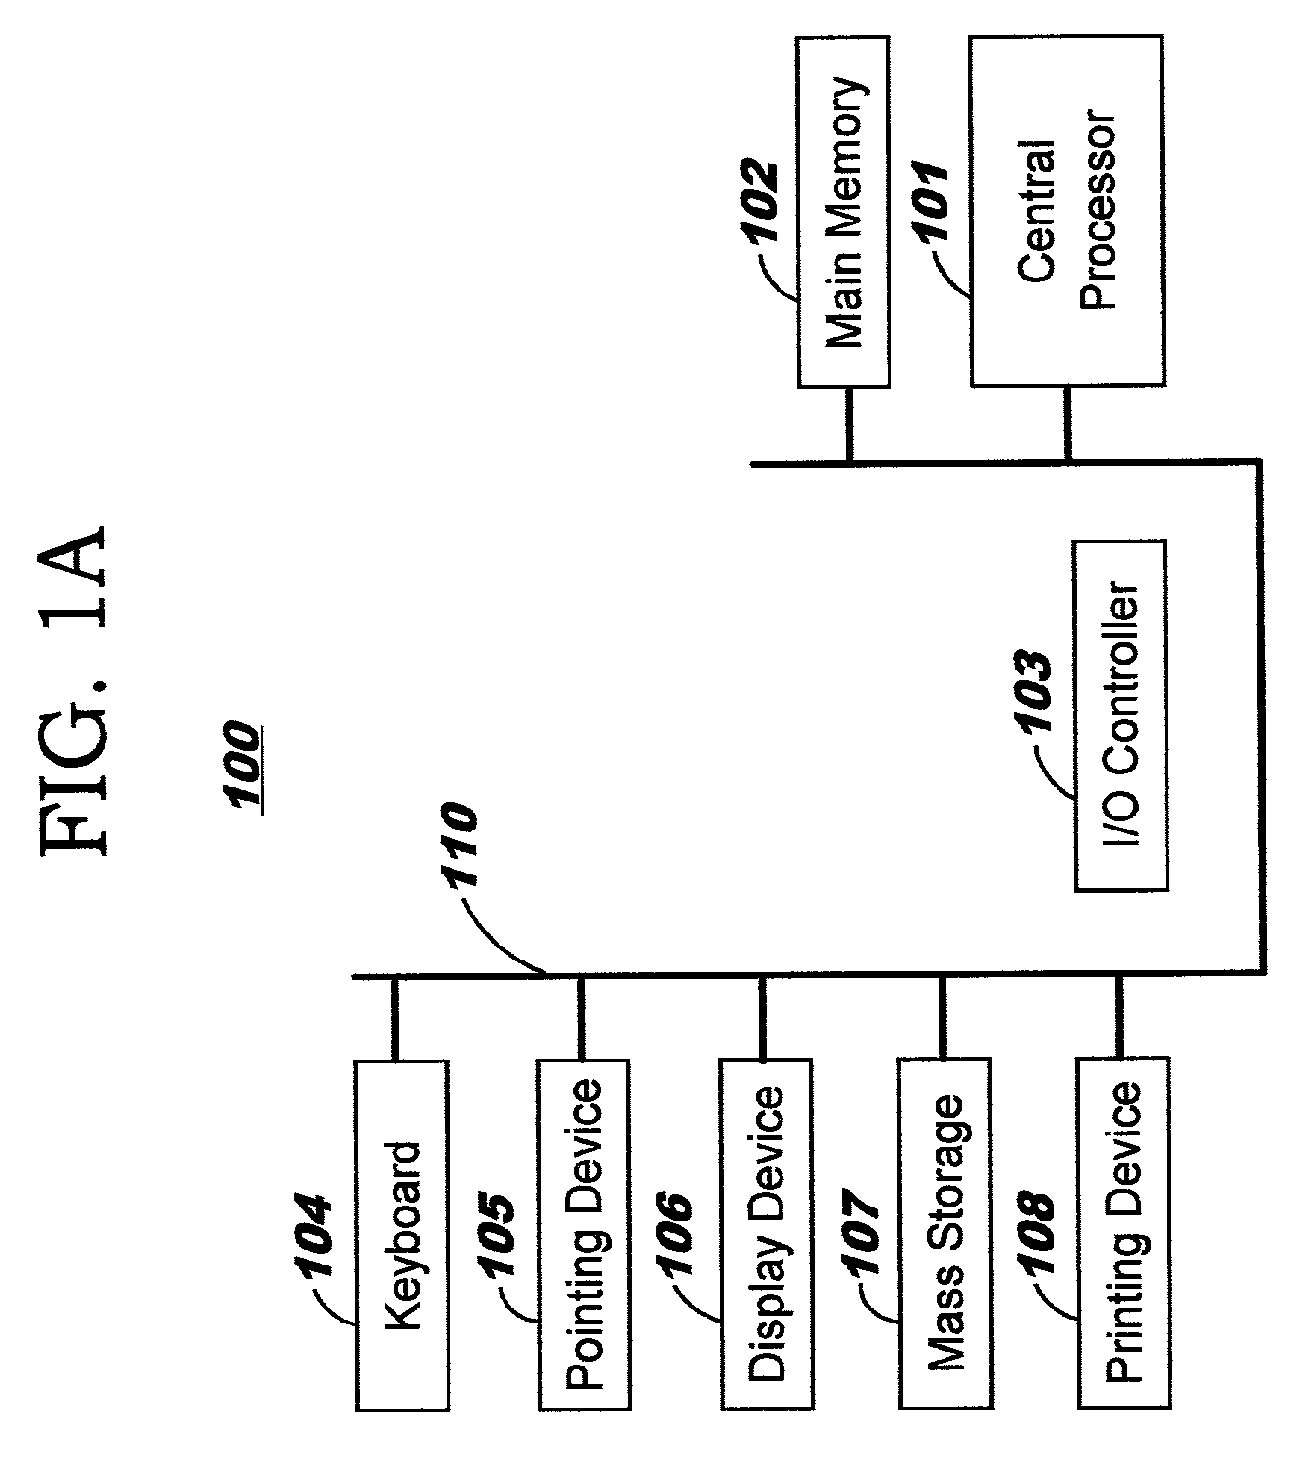 System in an electronic spreadsheet for persistently self-replicating multiple ranges of cells through a copy-paste operation and a self-replication table